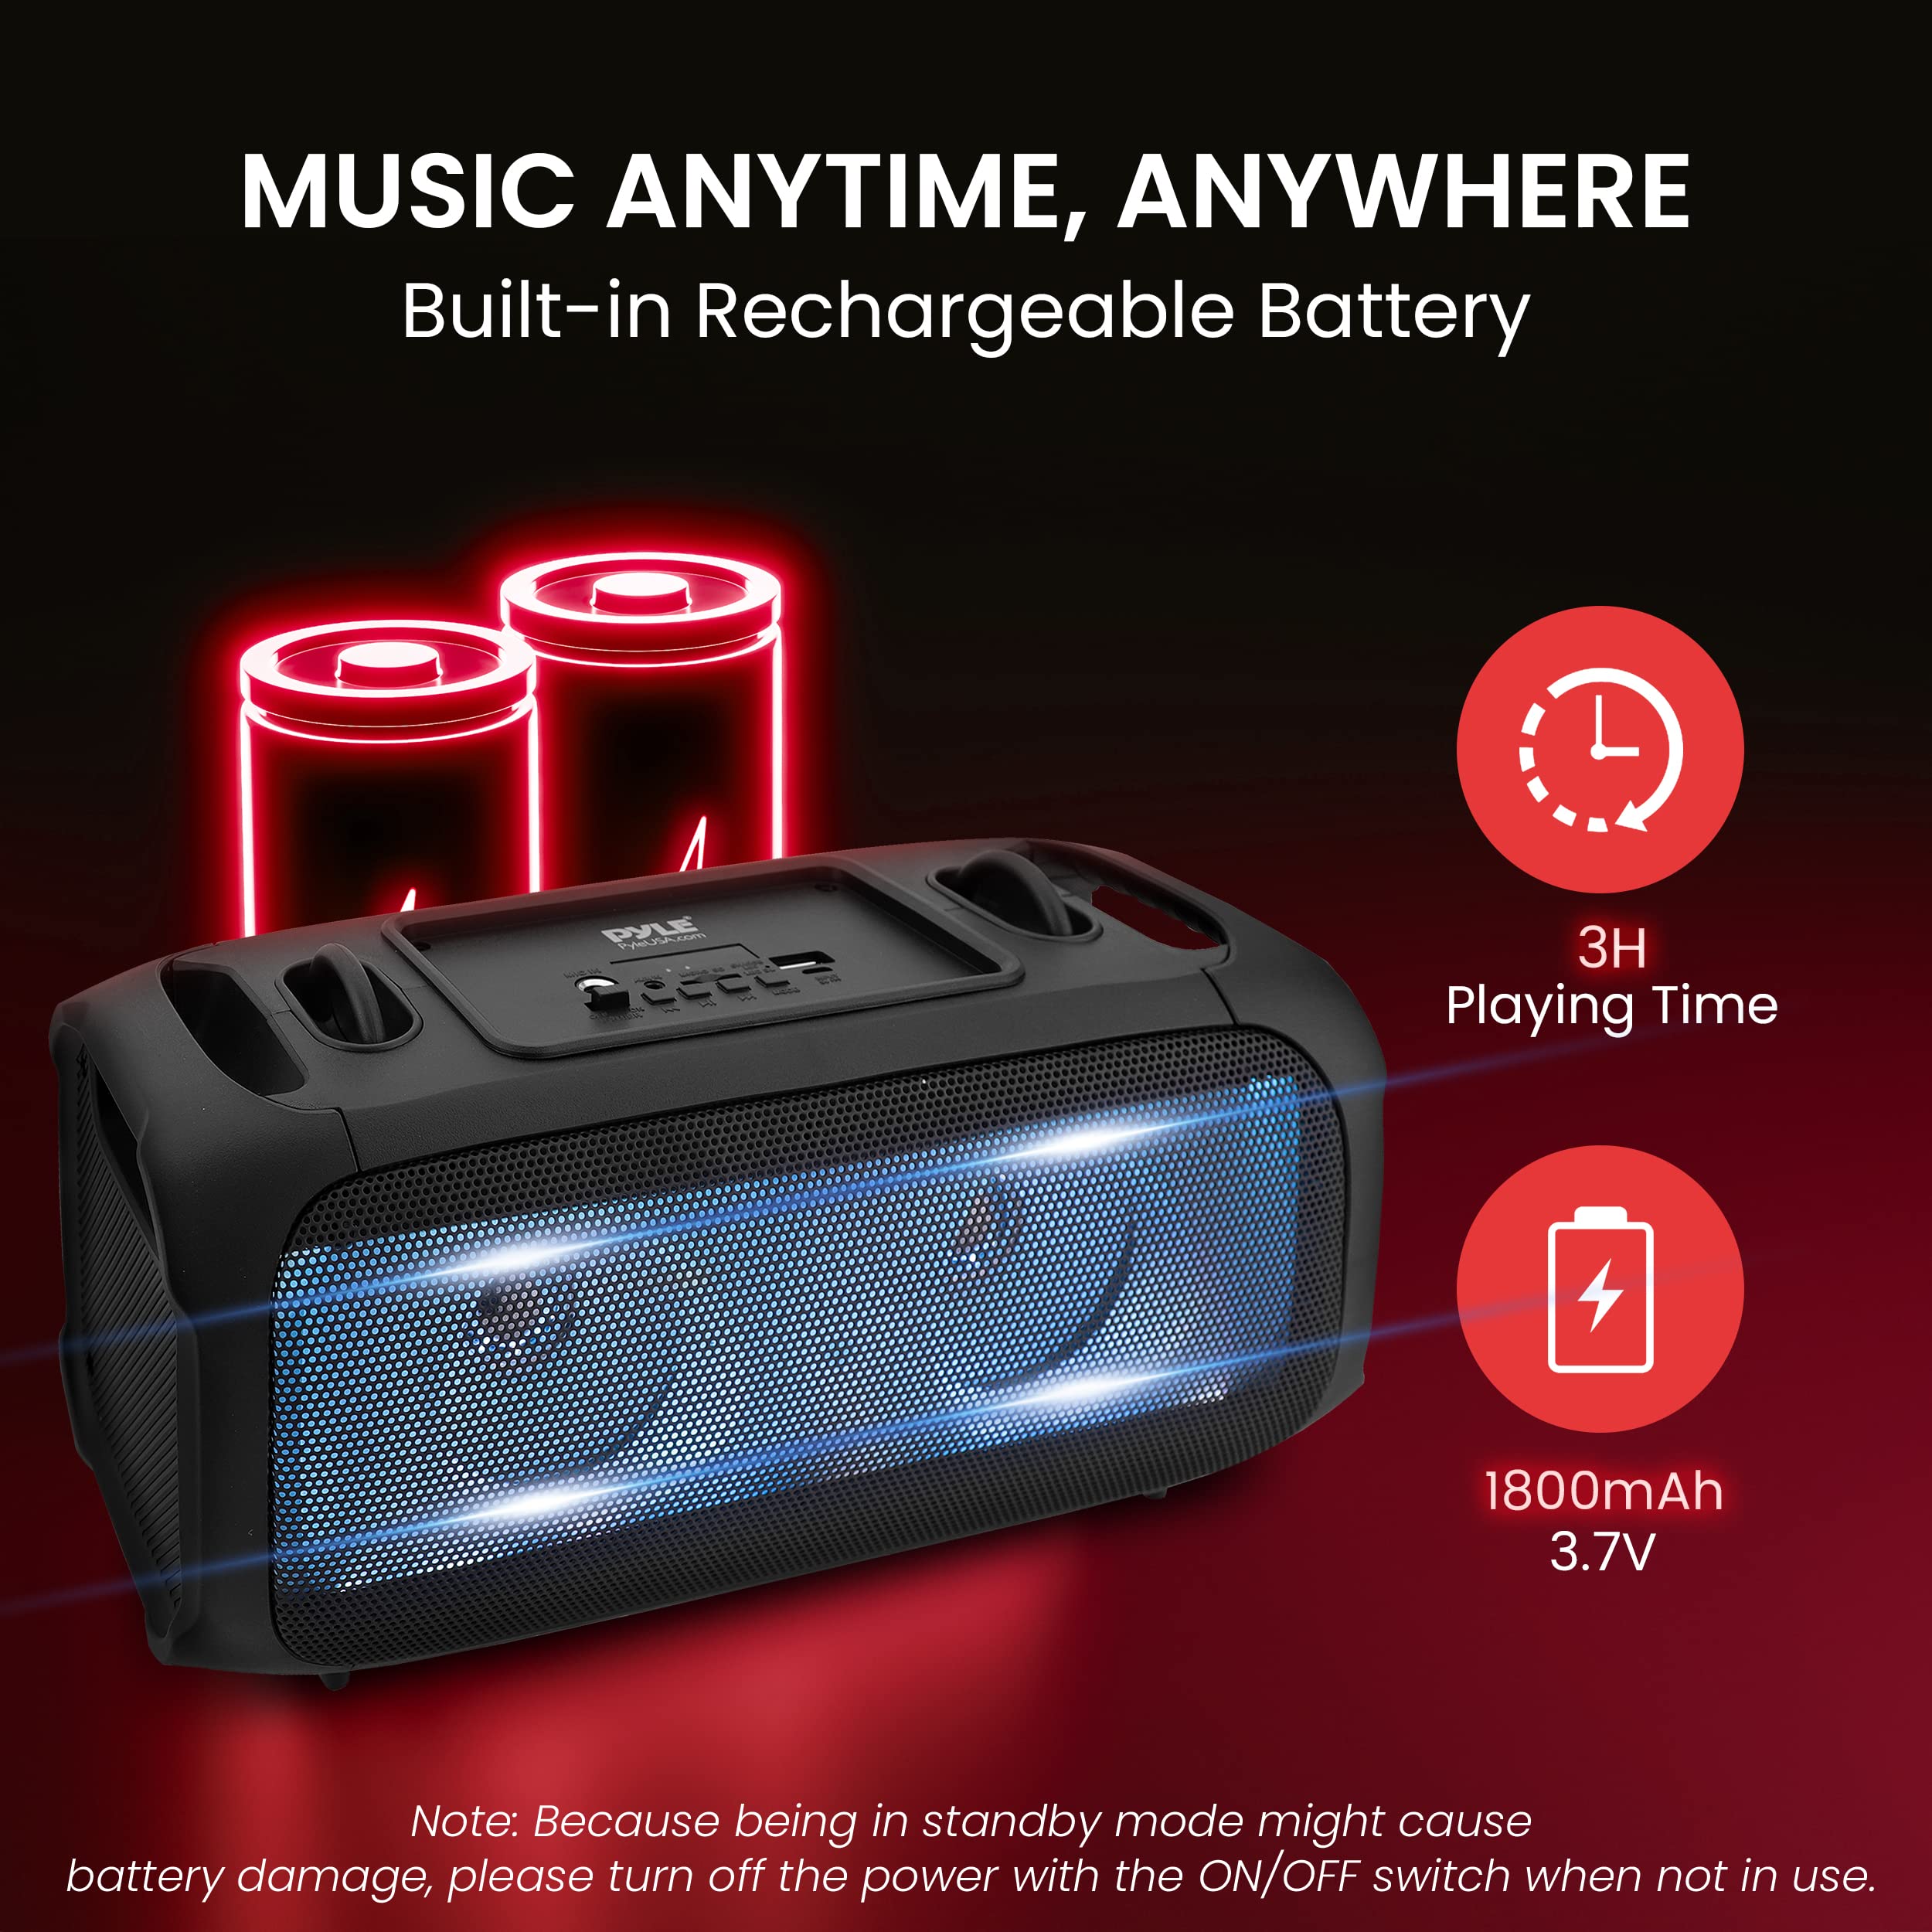 Pyle Wireless Portable Bluetooth Boombox Speaker - 120W Rechargeable Boom Box Speaker Portable Barrel Loud Stereo System - Flashing LED, FM Radio/Aux/MP3/USB Flash Drive/Micro SD, & 1/4